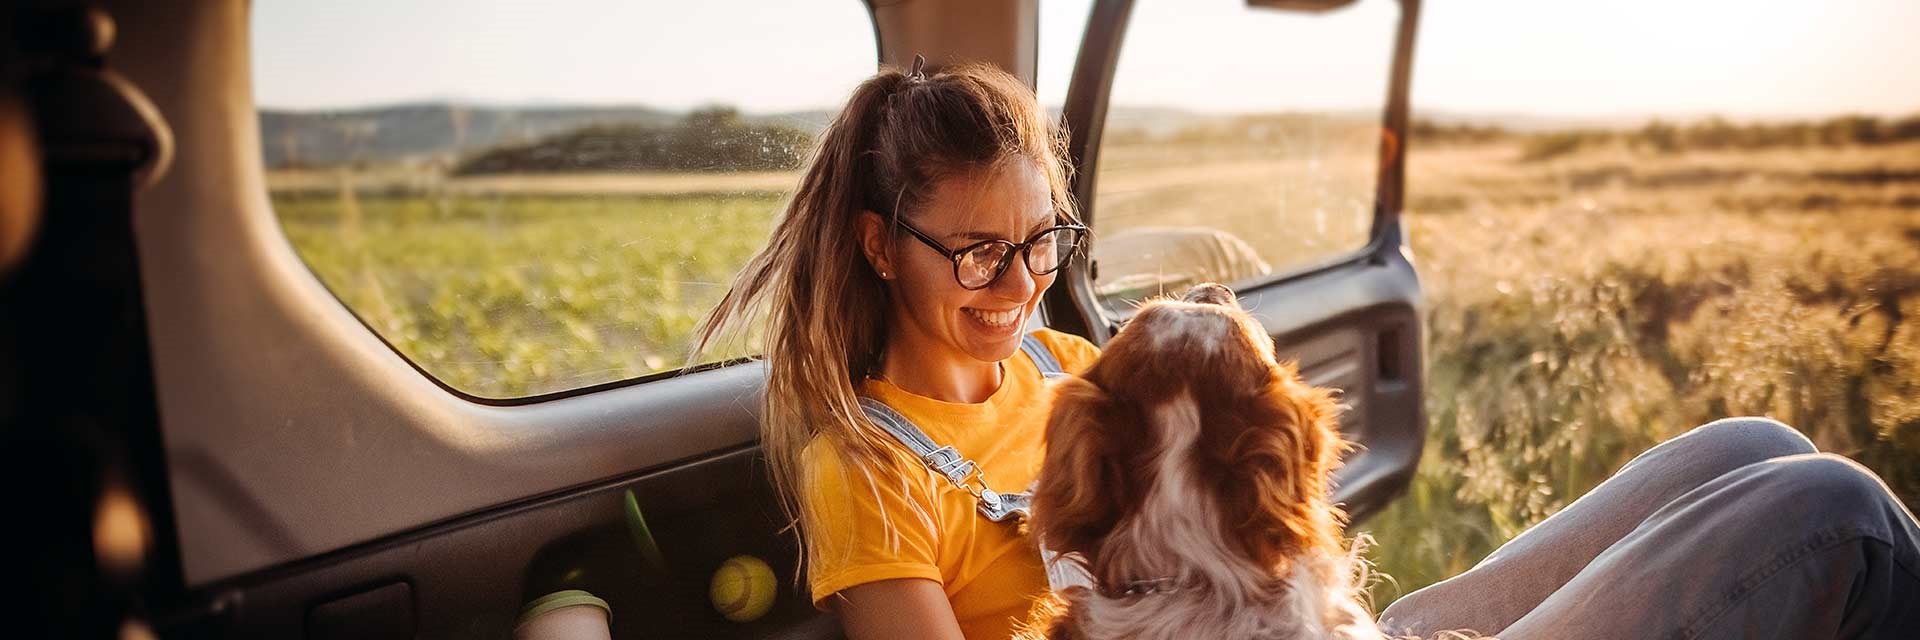 Woman and dog in a car with view of a sunny field behind